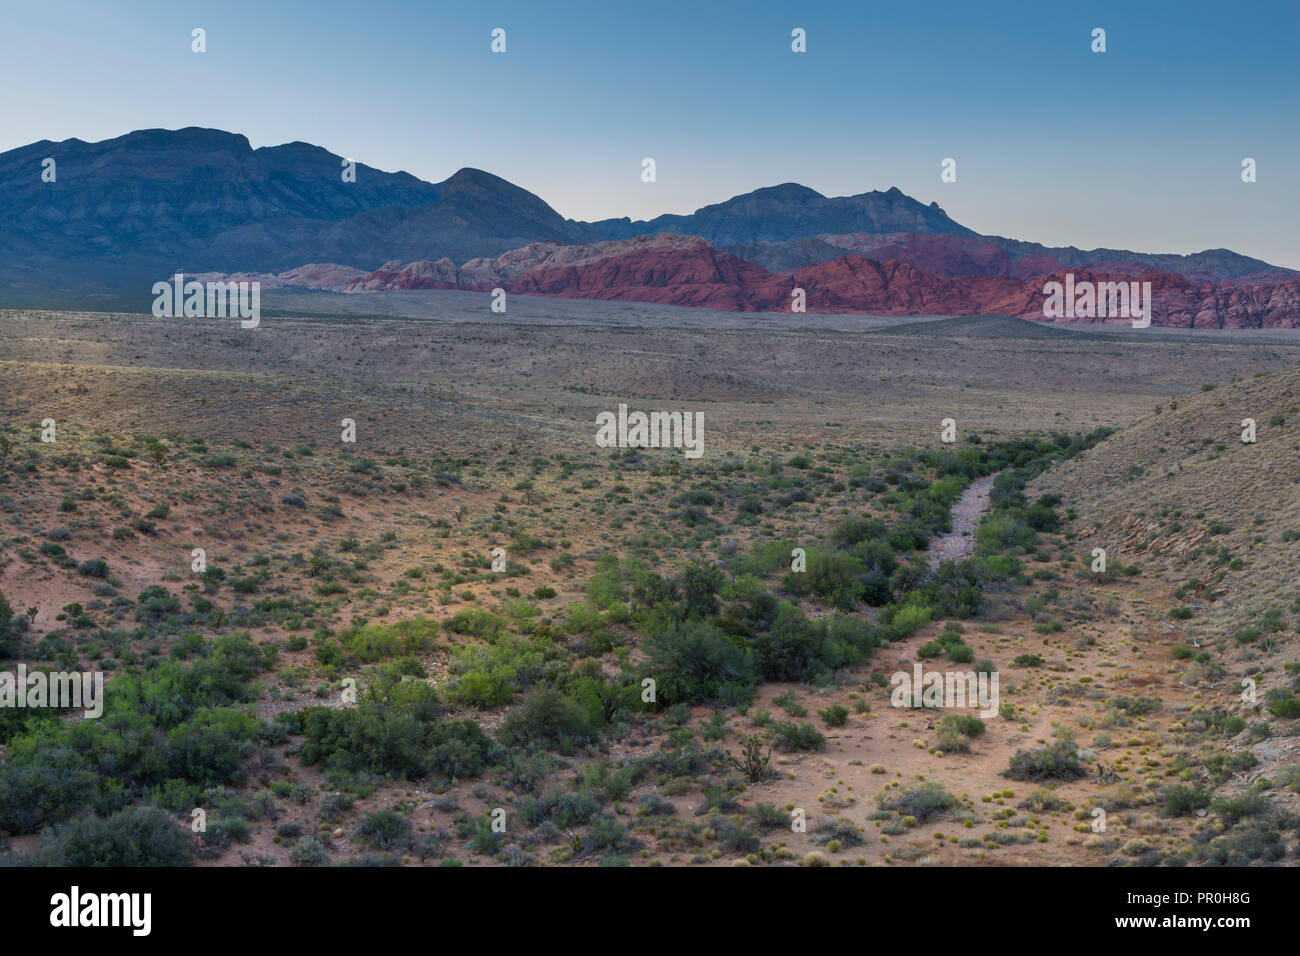 View of rock formations and flora in Red Rock Canyon National Recreation Area, Las Vegas, Nevada, United States of America, North America Stock Photo